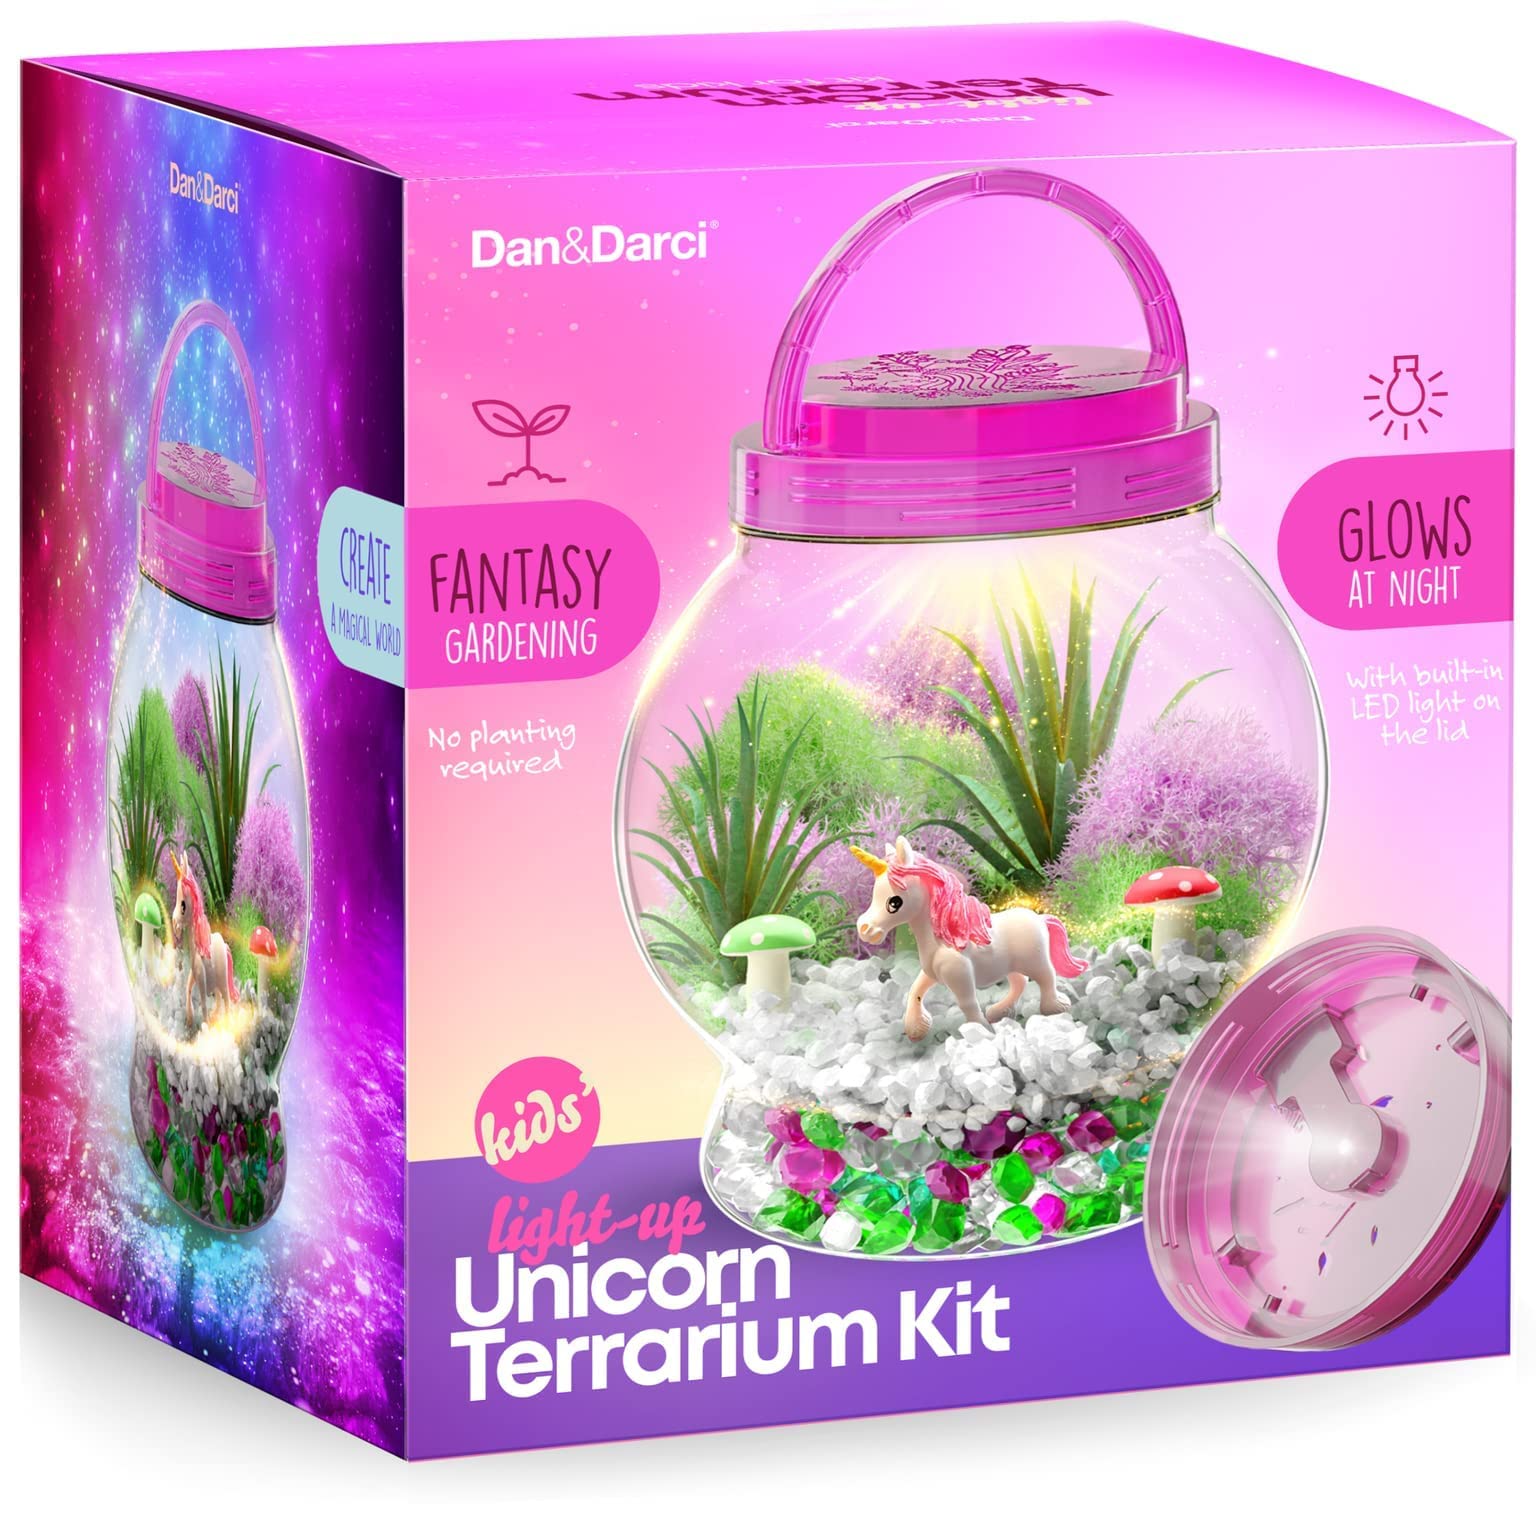 Light-Up Unicorn Terrarium Kit for Kids - Kids Birthday Gifts for Kids - Best Unicorn Toys & Activities Kits Presents - Arts & Crafts Stuff for Little Girls & Boys Age 4 5 6 7 8-12 Year Old Girl Gift